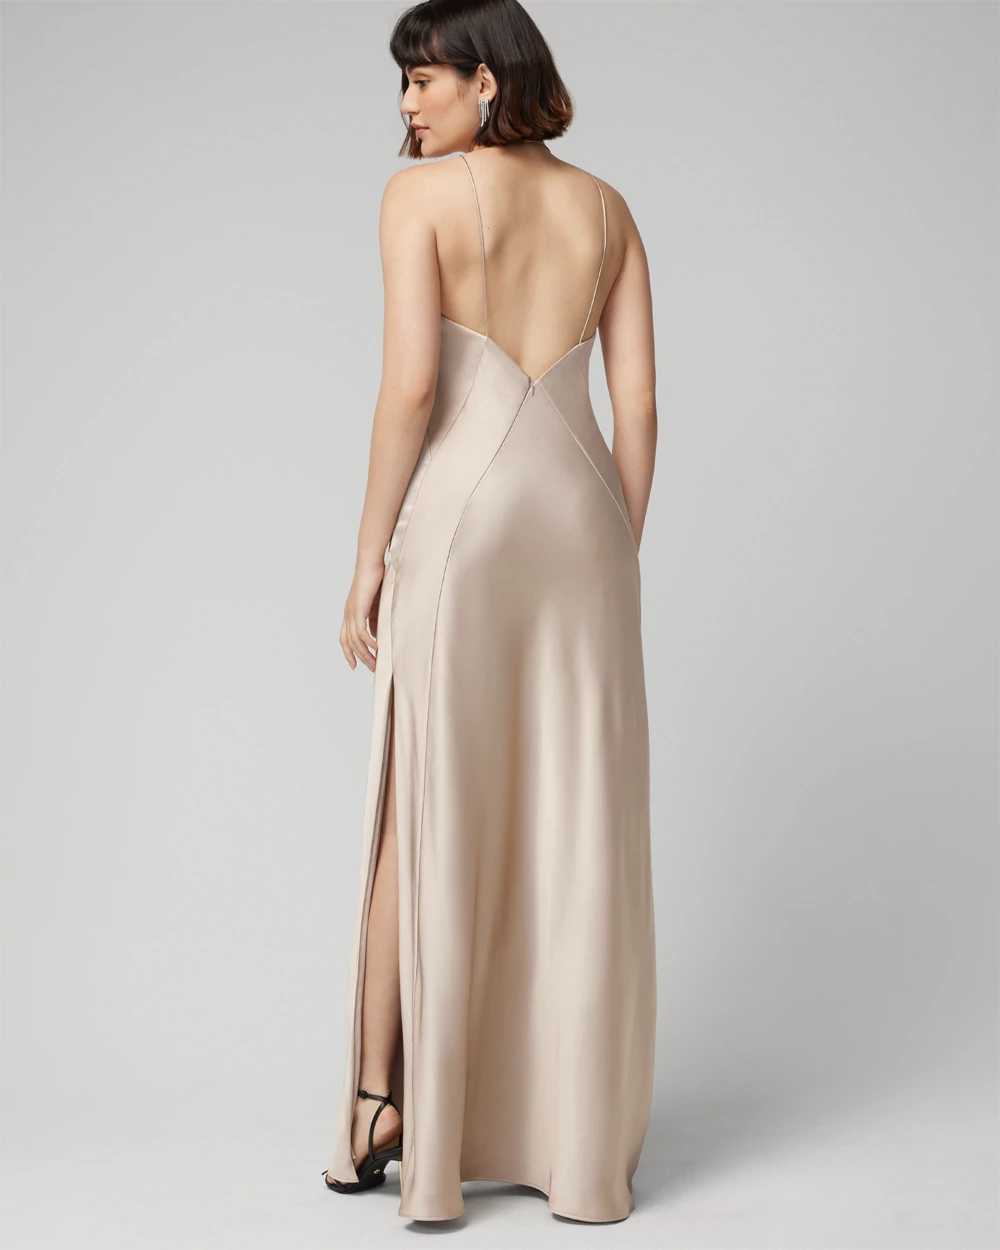 V-Neck Low Back Satin Gown click to view larger image.